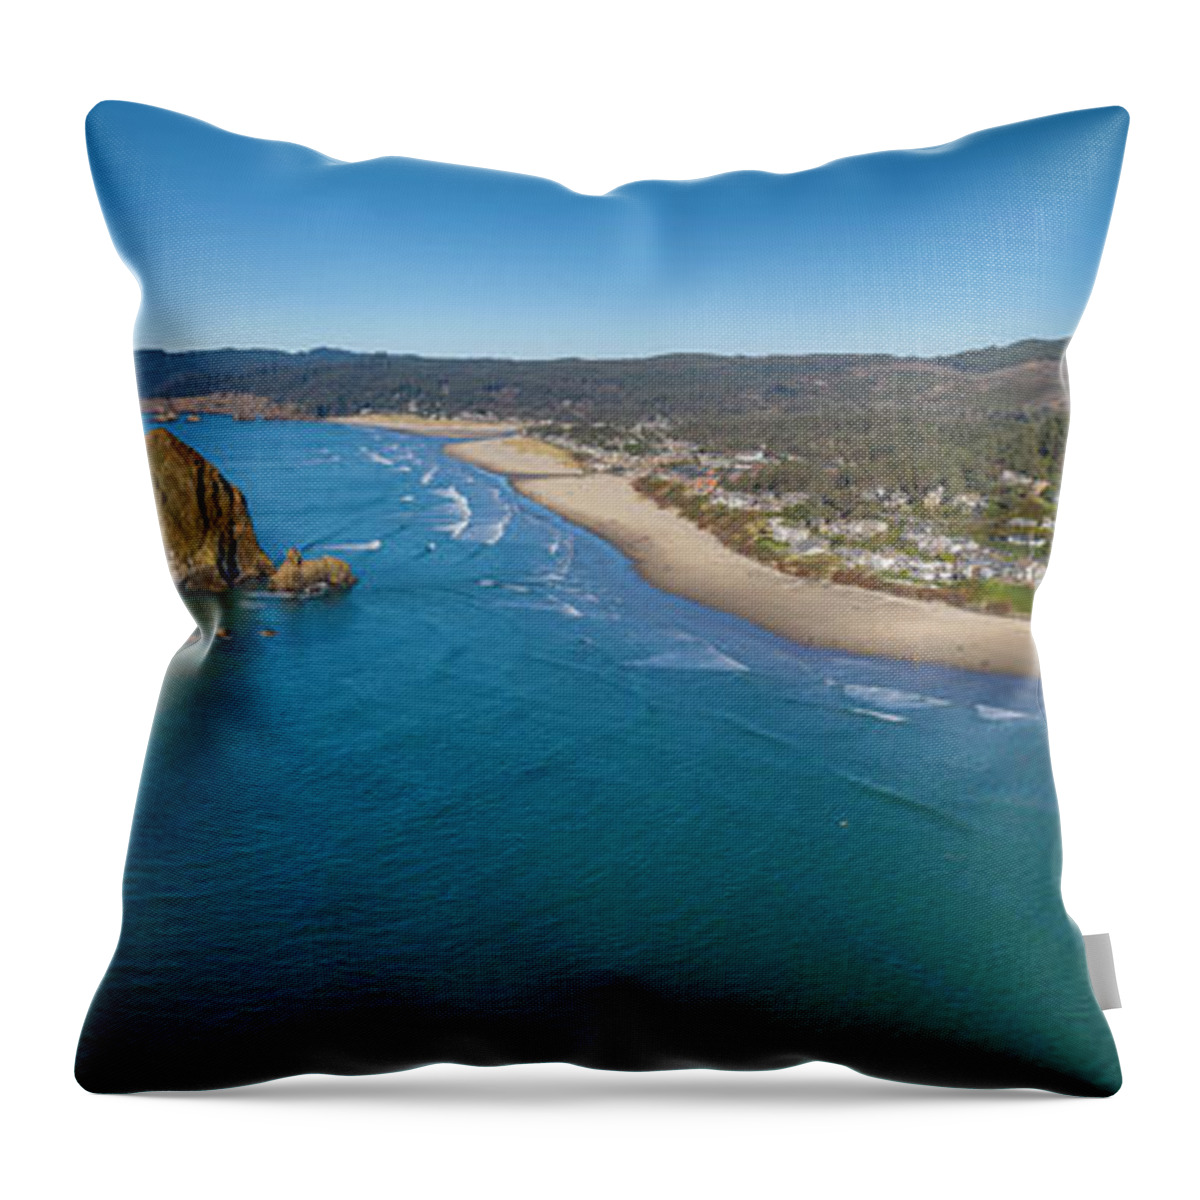 Canon Beach Haystack Rock Panorama Throw Pillow featuring the photograph Canon Beach Haystack Rock Panorama by Dustin K Ryan